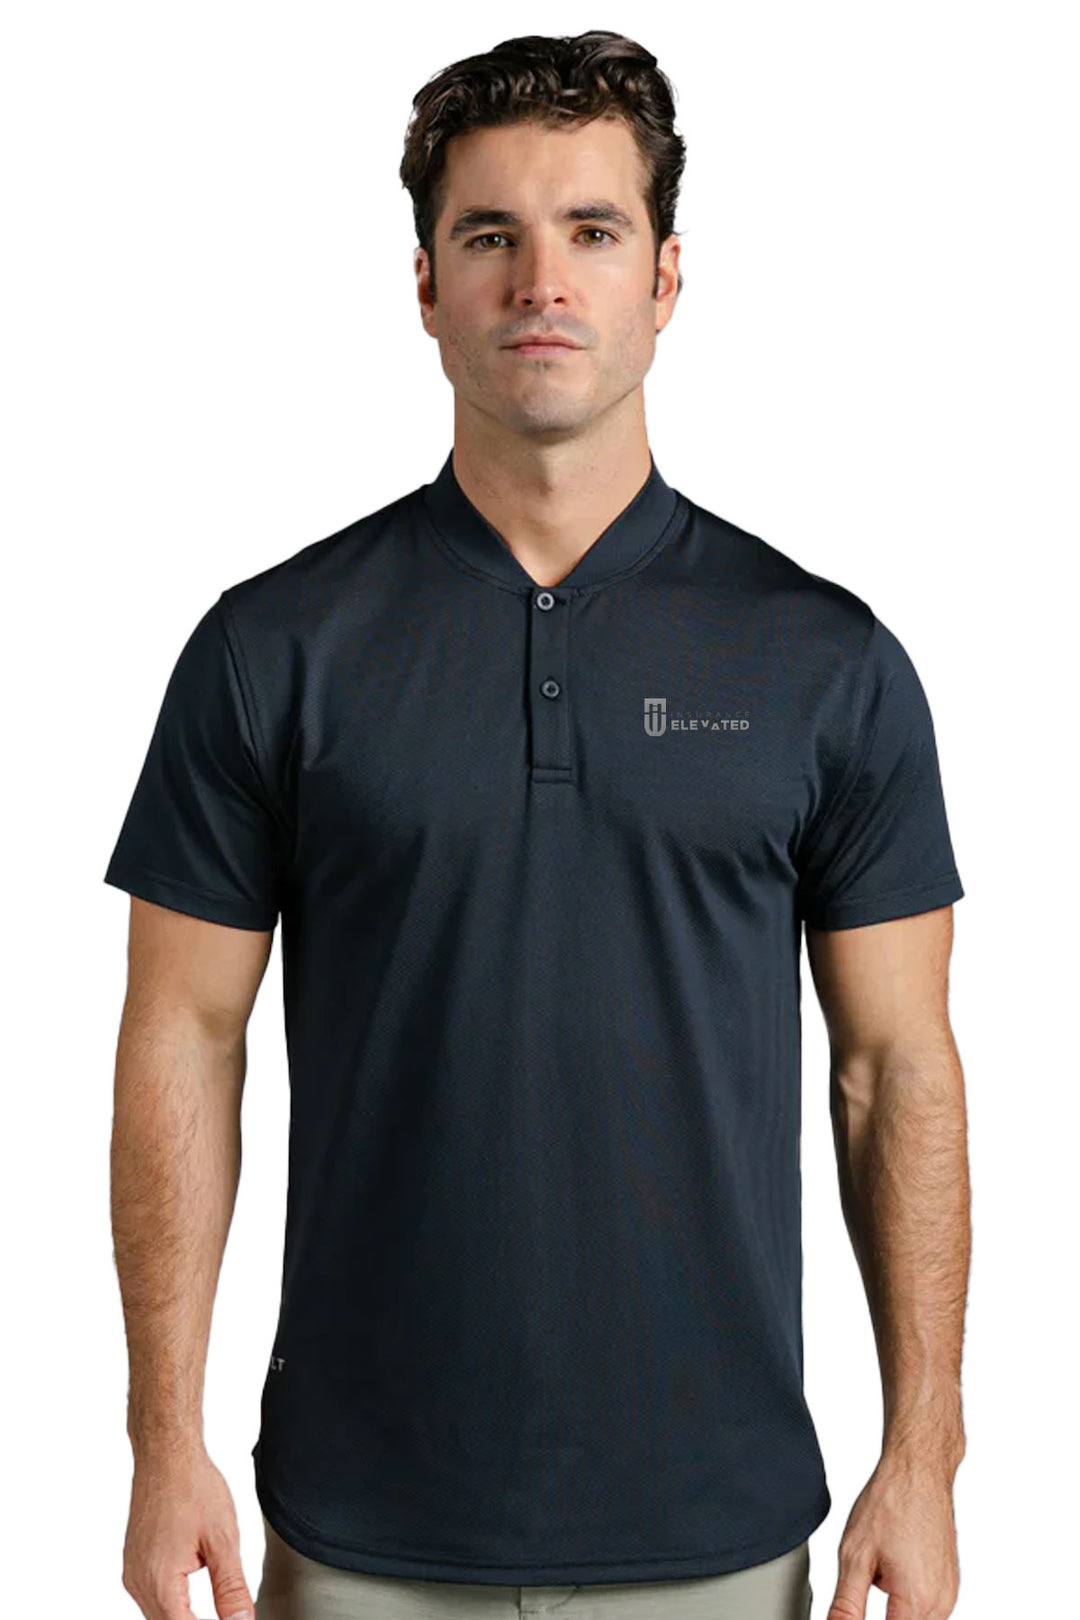 Performance+ Stealth Polo